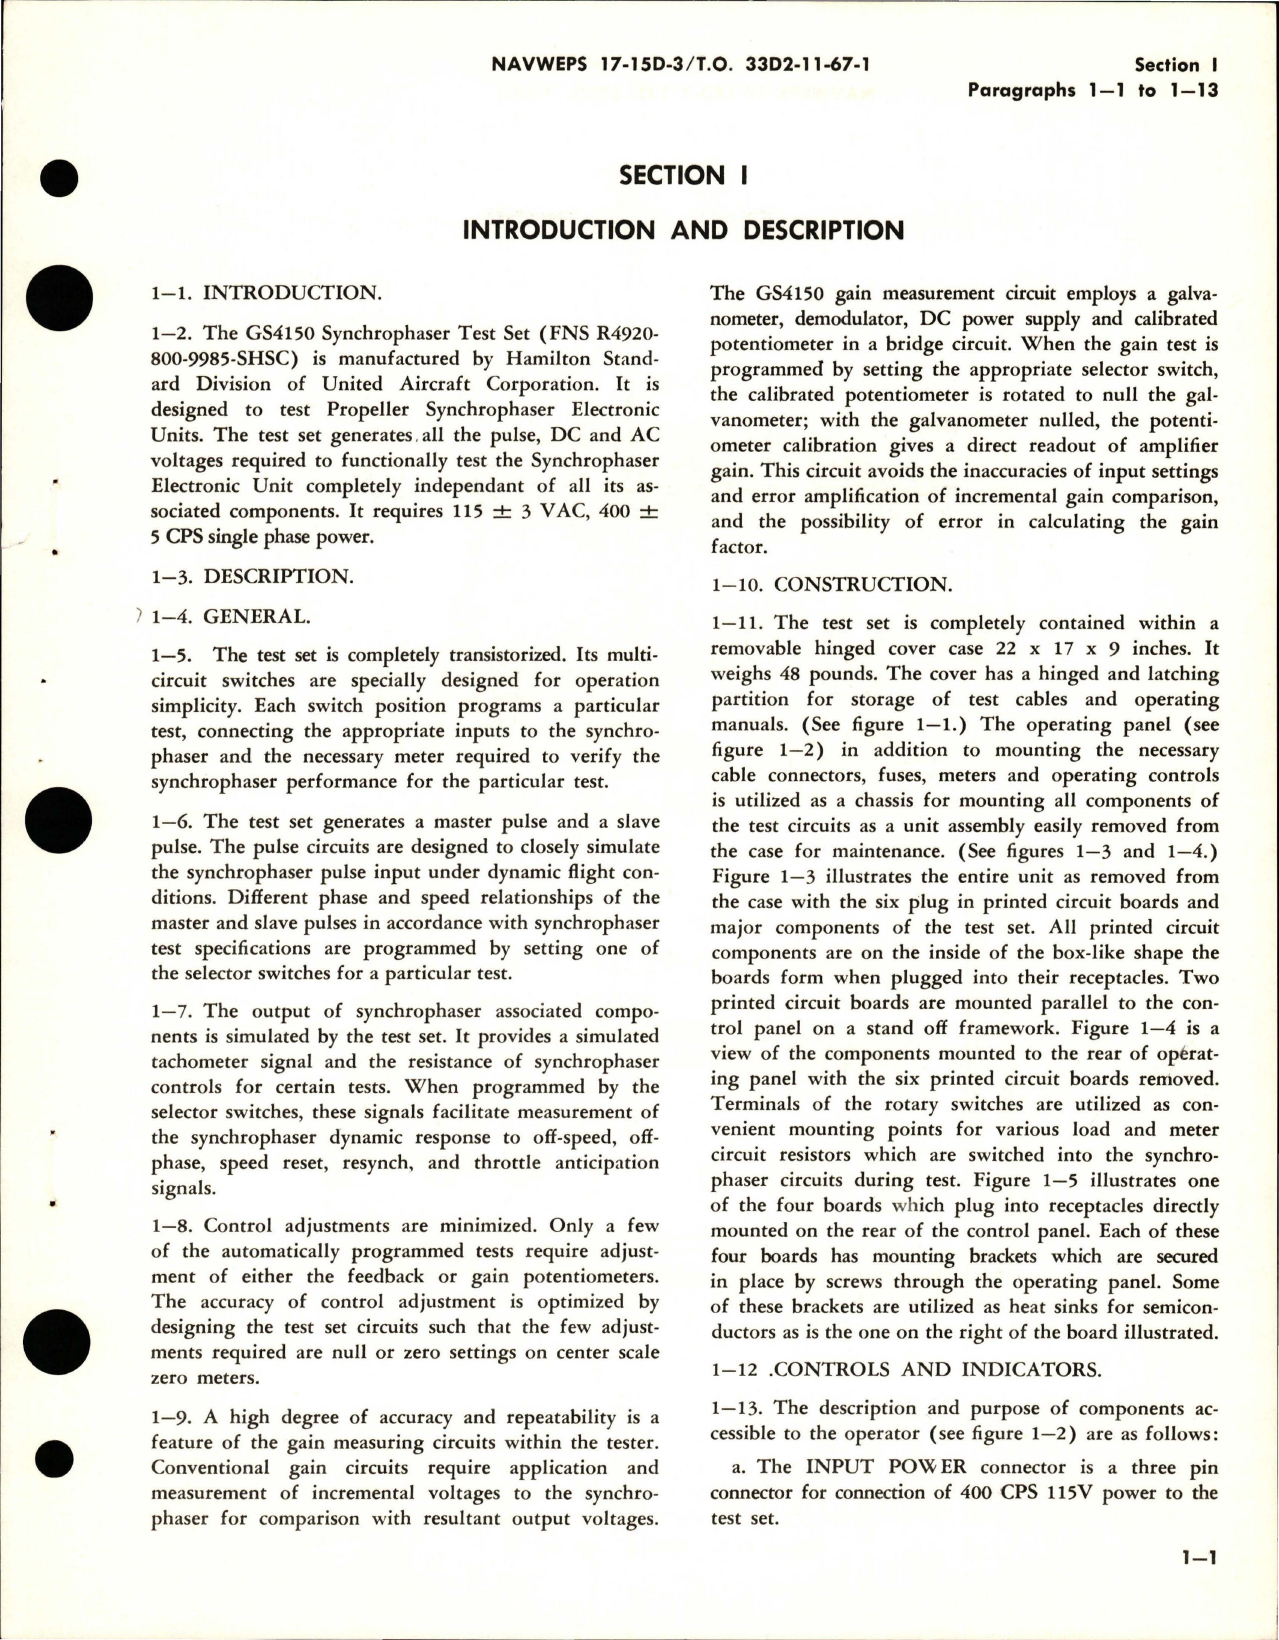 Sample page 5 from AirCorps Library document: Operation and Service Instructions with Illustrated Parts Breakdown for Synchrophaser Test Set - Part GS4150 